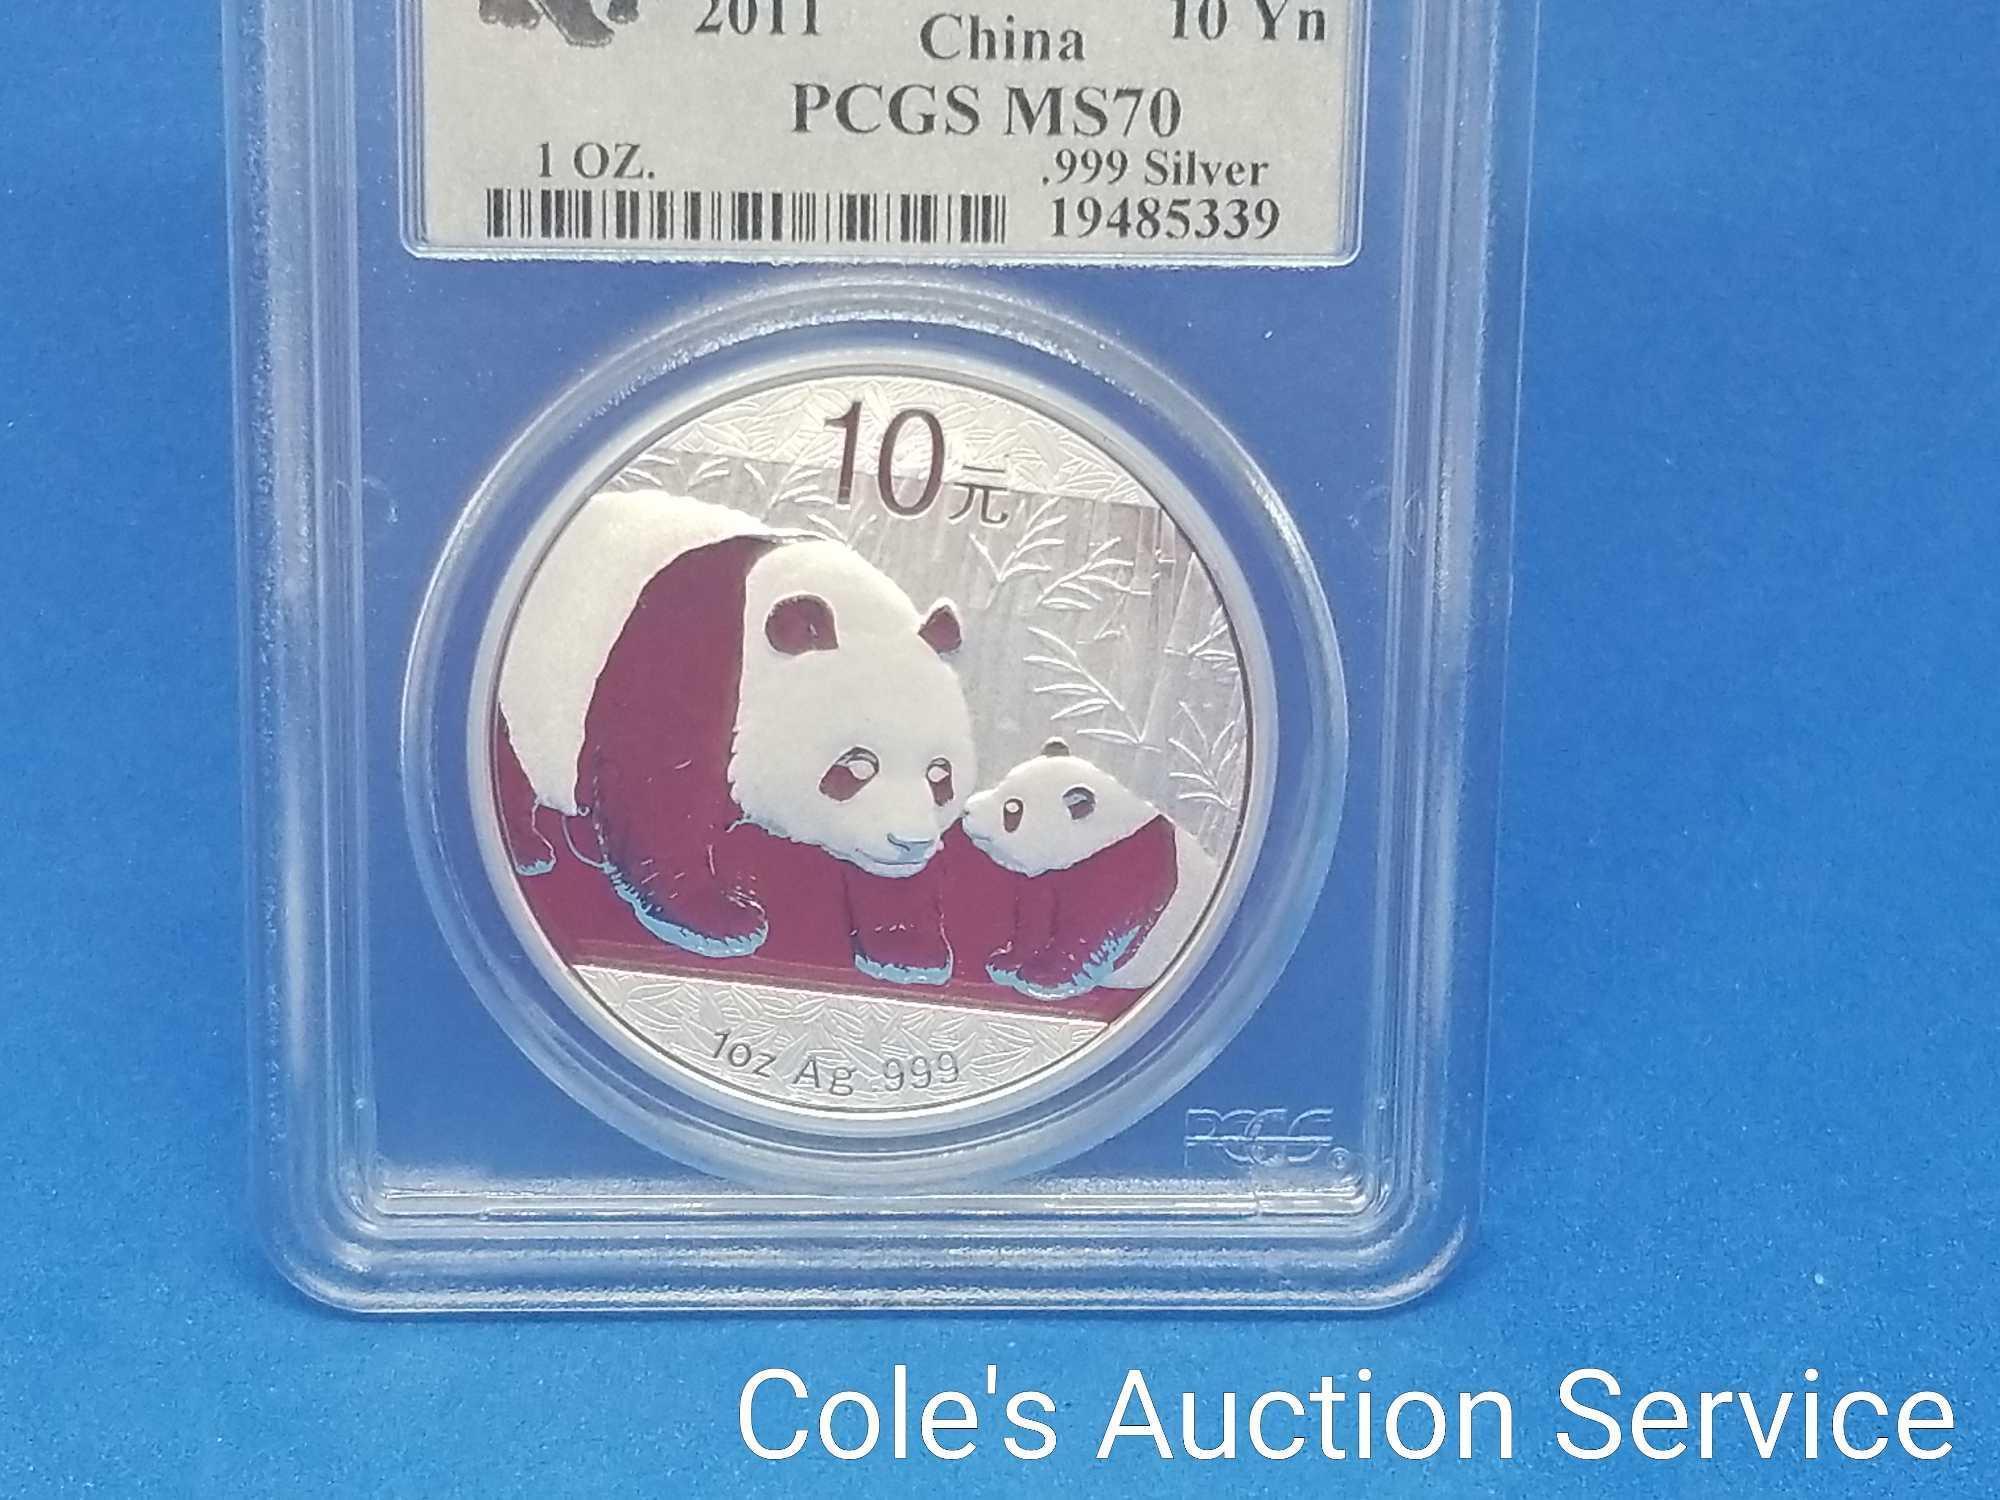 2011 Chinese first strike 1 oz silver coin. Beautiful coin graded MS70 by PCGS.